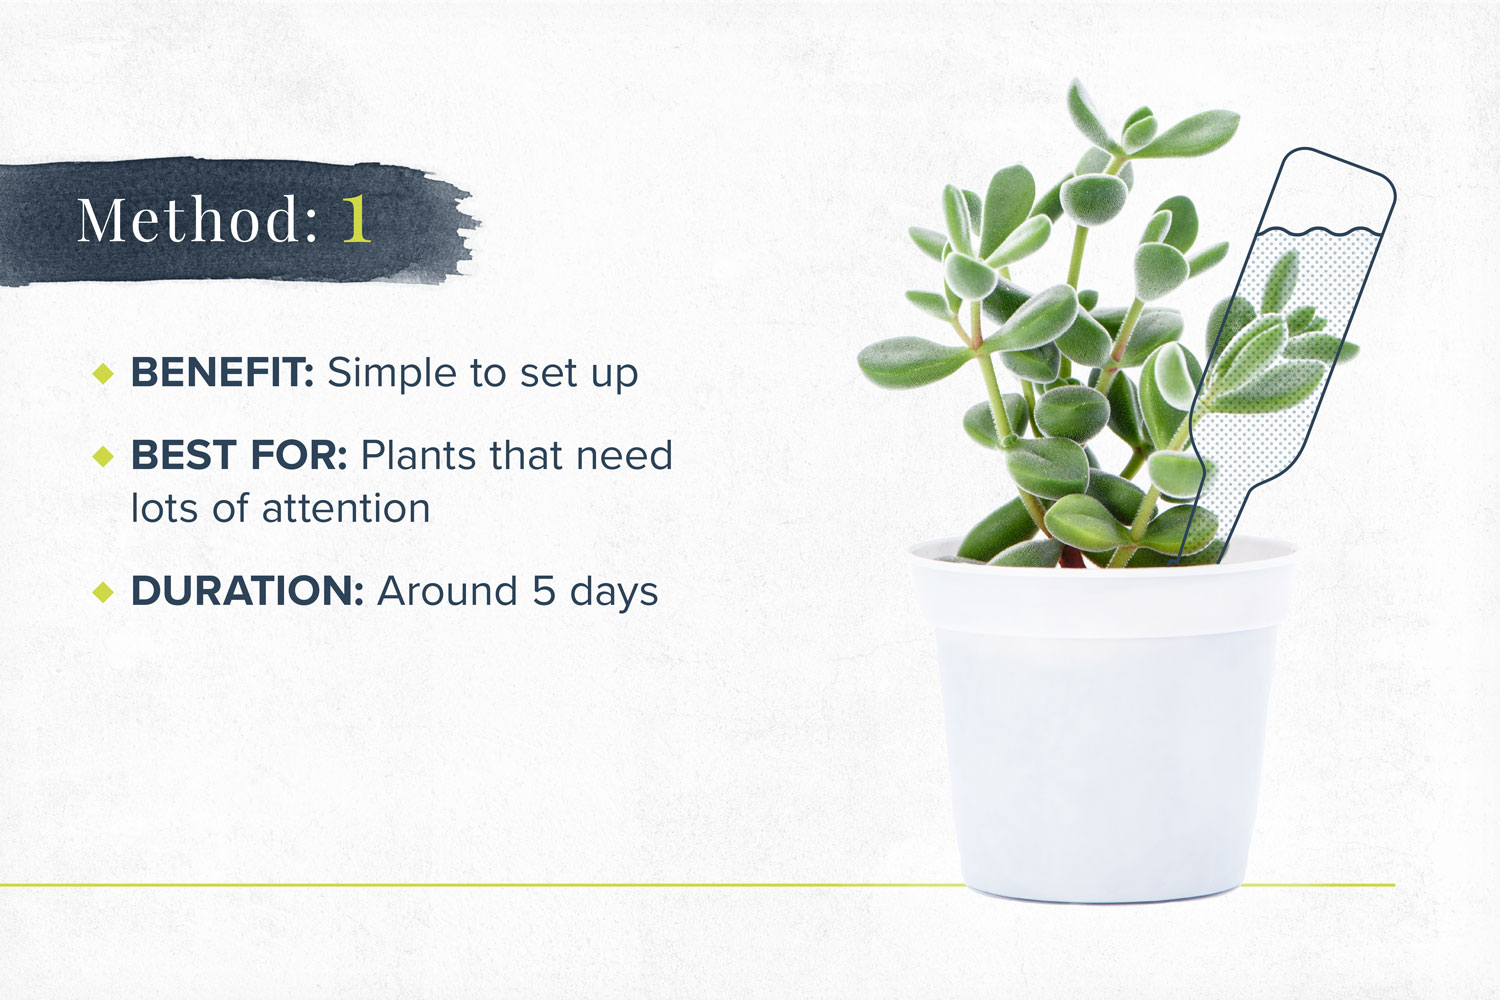 Benefits: Simple to set up Best for: Plants that need lots of attention Duration: Around 5 days